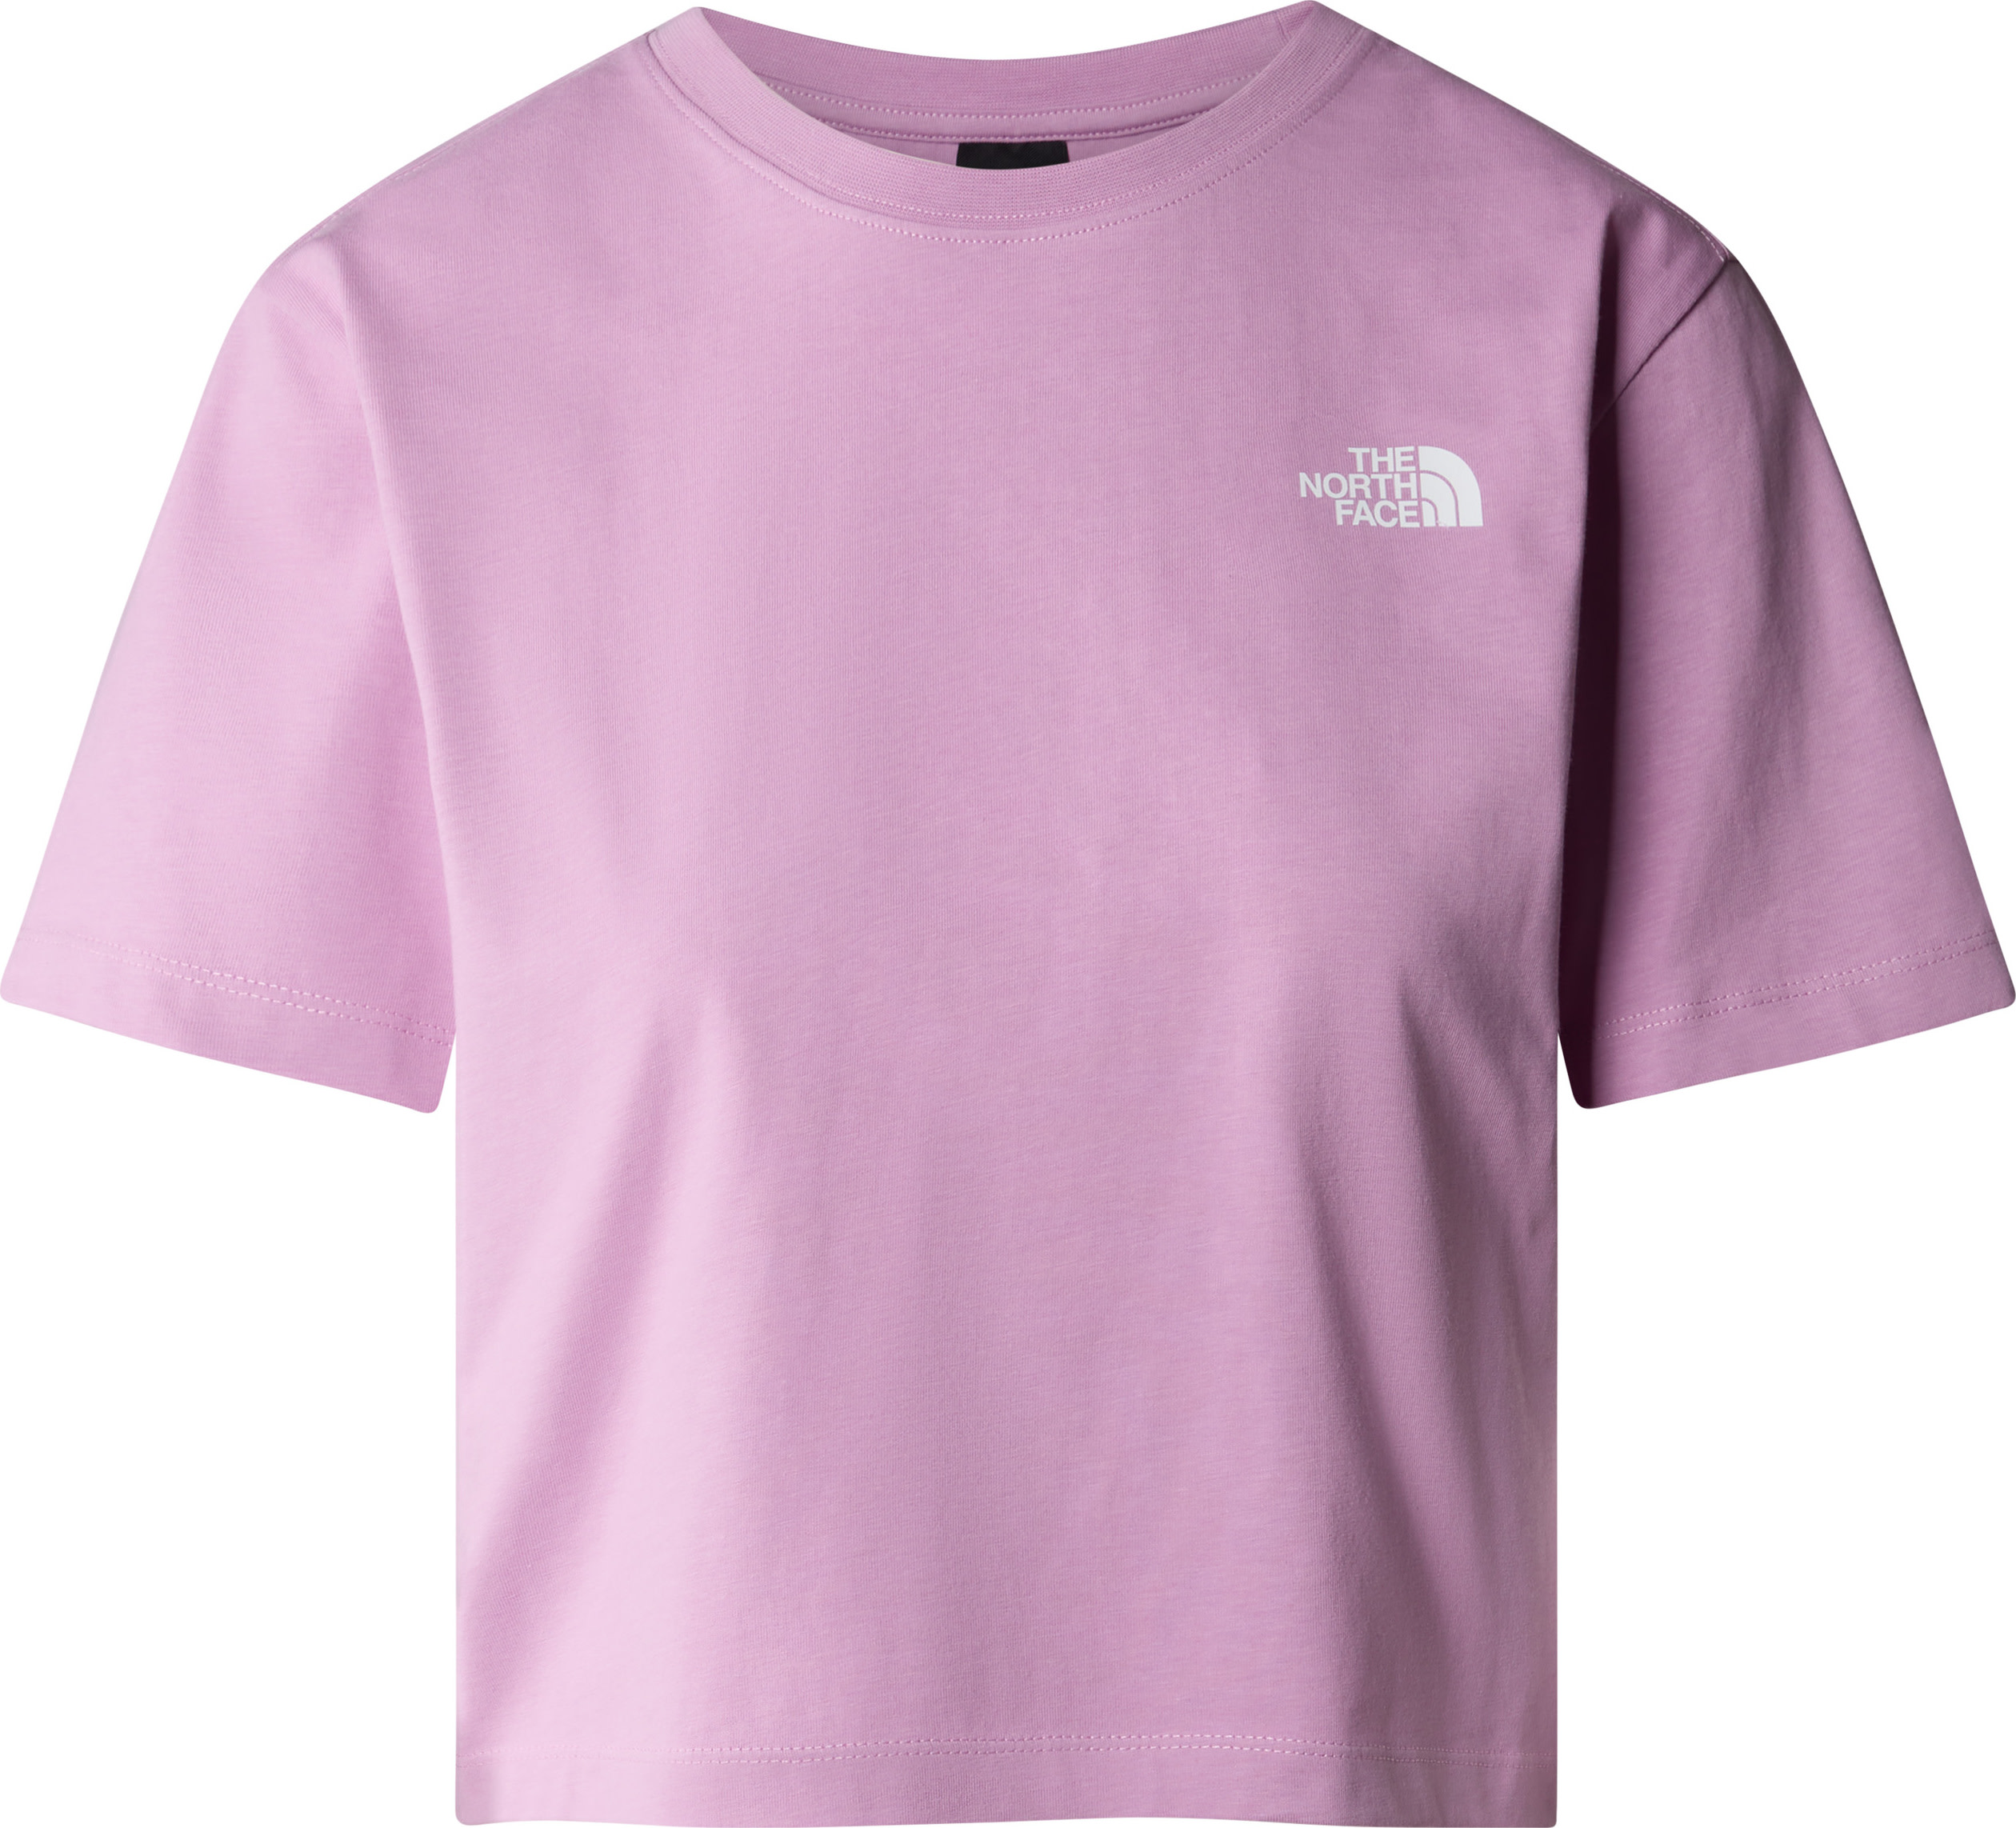 The North Face The North Face Women's Outdoor T-Shirt Mineral Purple L, Mineral Purple